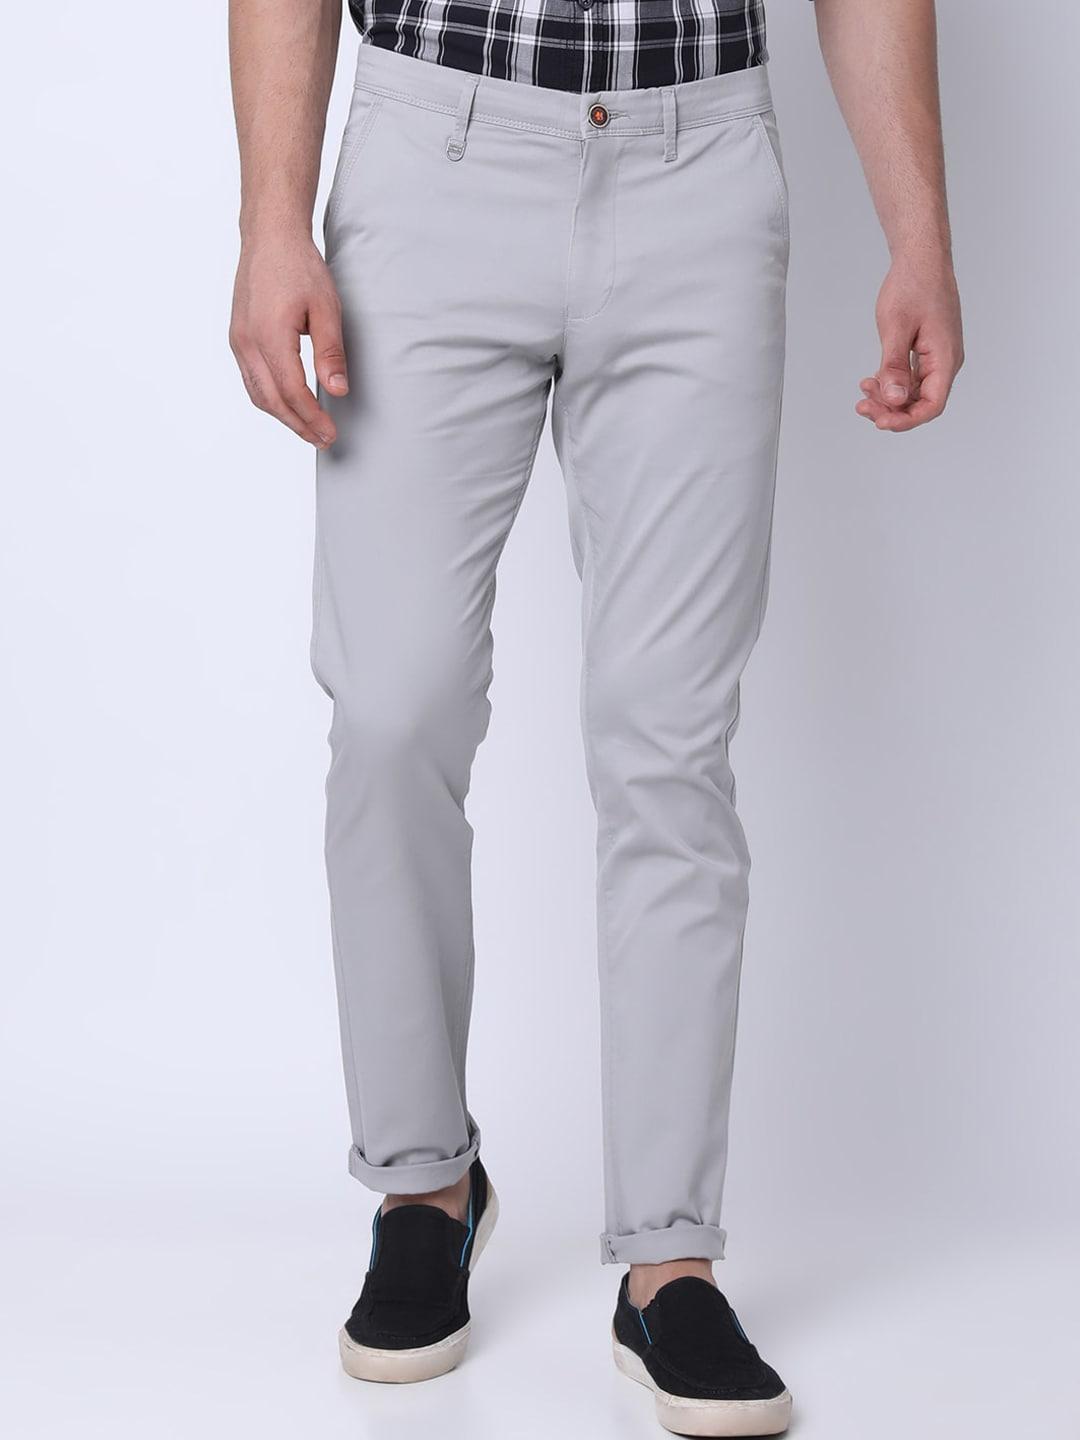 oxemberg-men-slim-fit-cotton-chinos-trousers